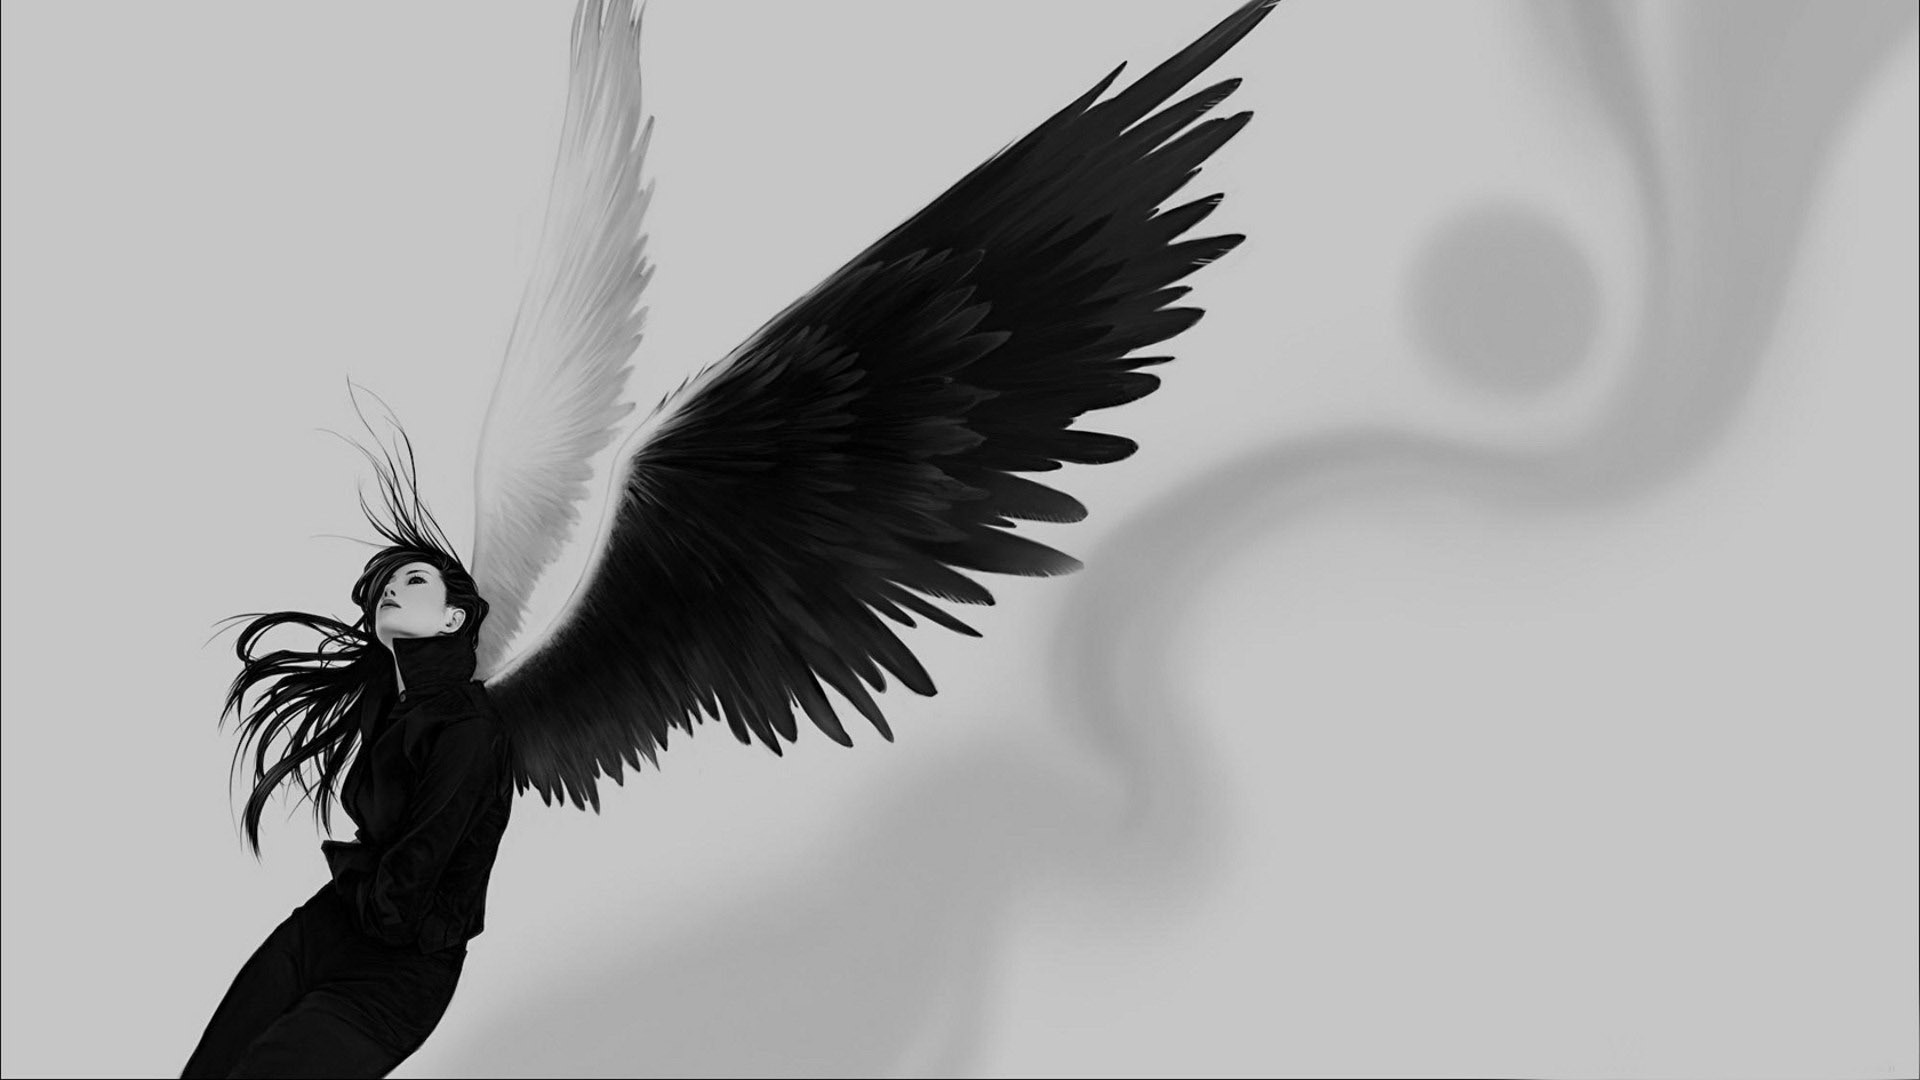 Anime Angel Wings Wallpaper Black And White Hd Mac - Woman With Black Wings - HD Wallpaper 